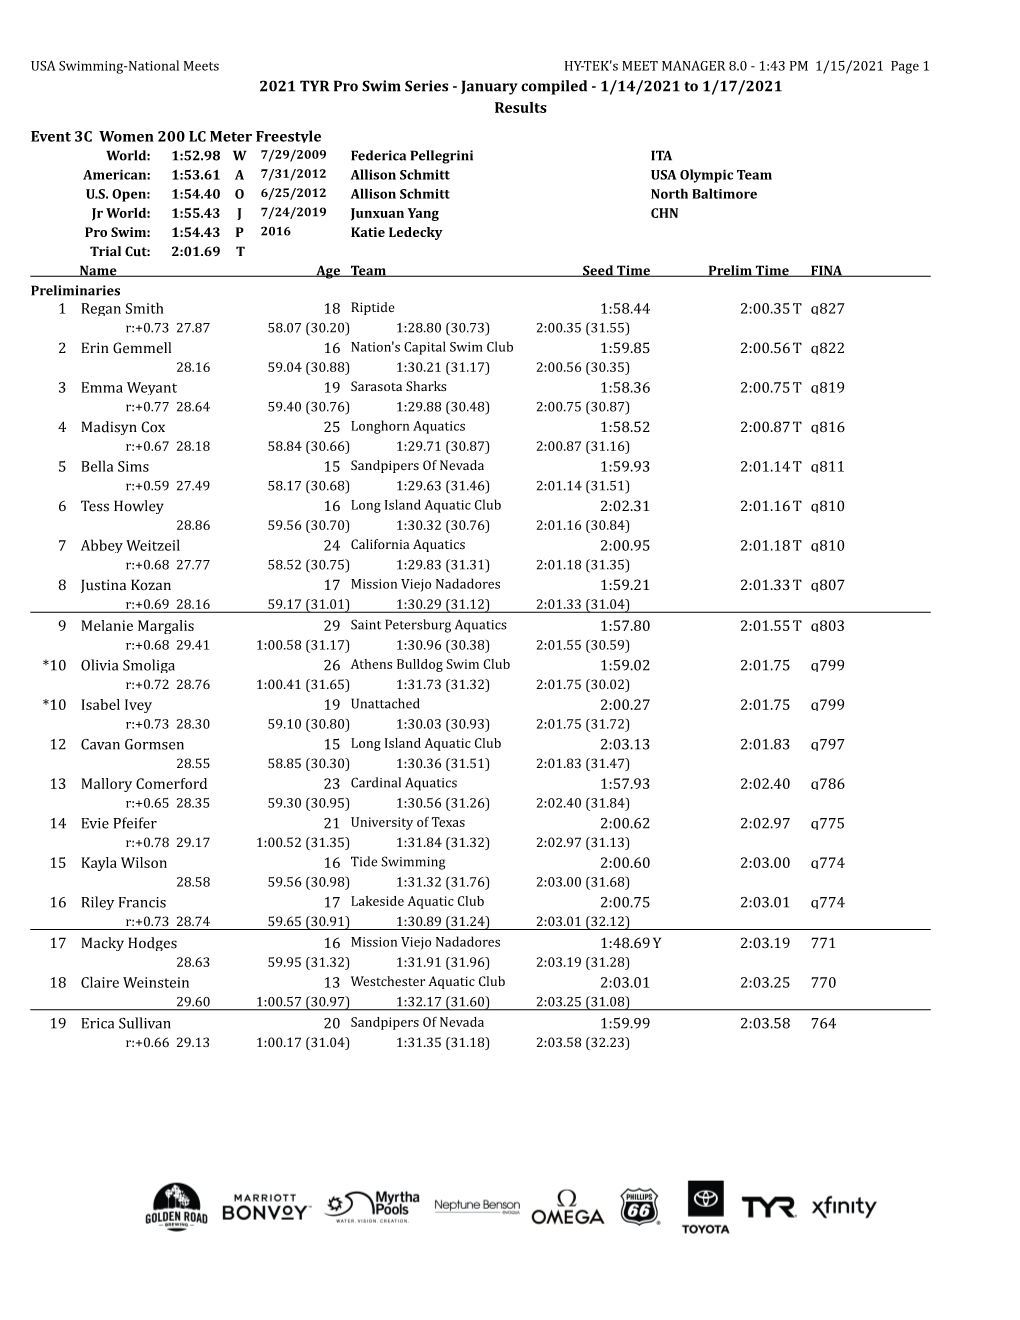 2021 TYR Pro Swim Series - January Compiled - 1/14/2021 to 1/17/2021 Results